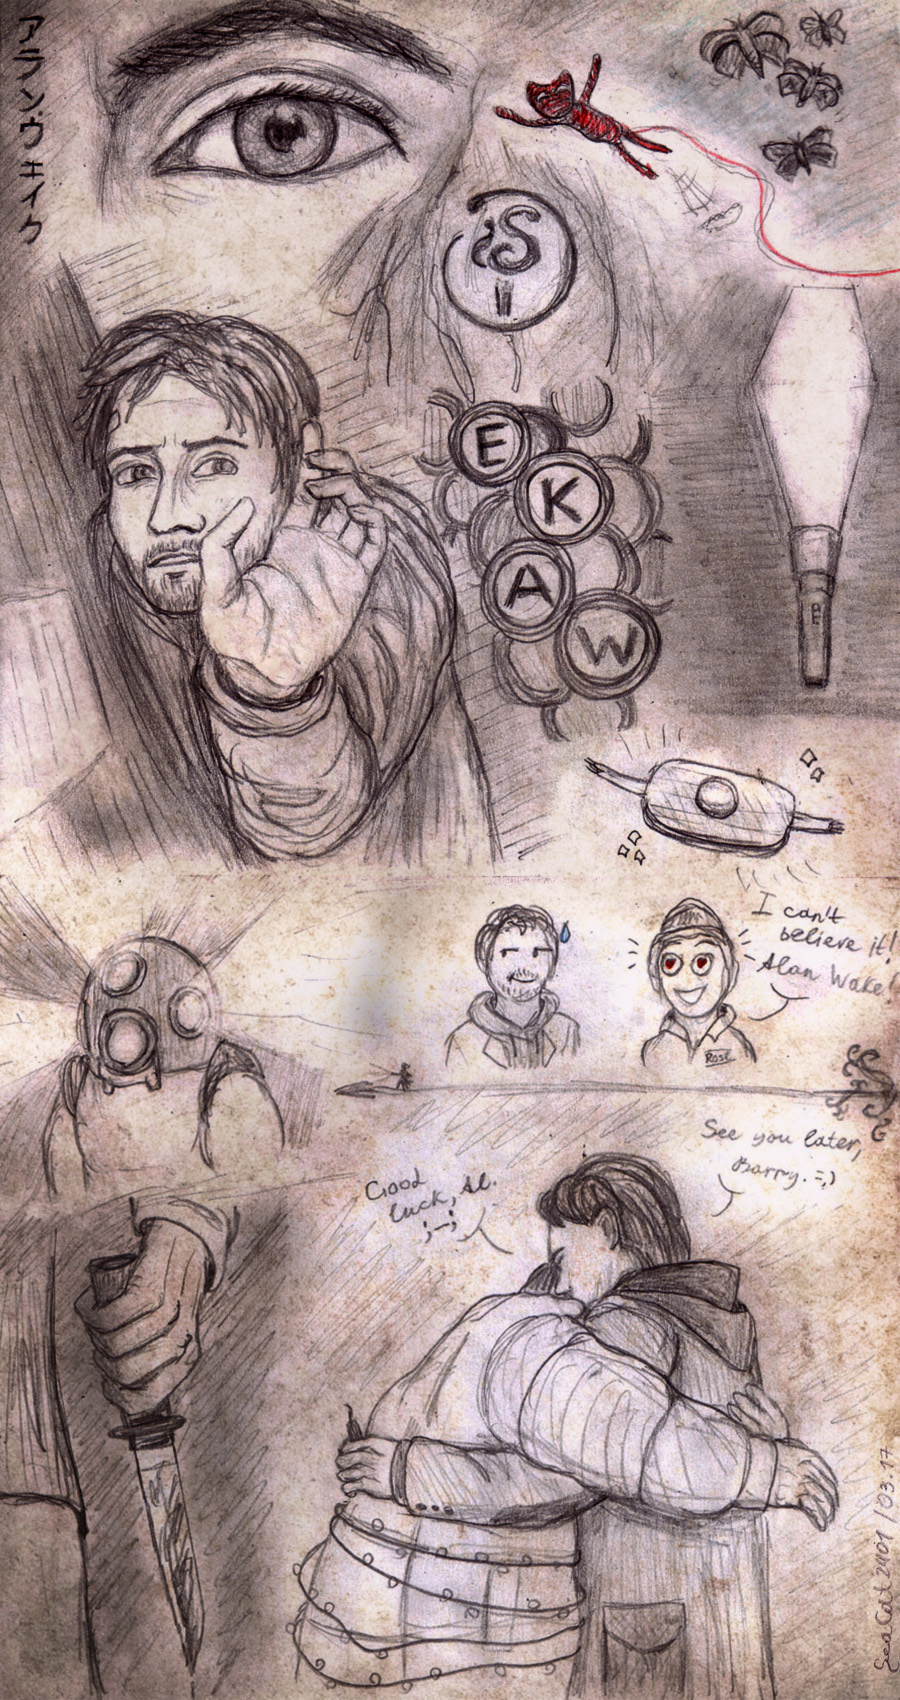 Alan Wake - #1 March Sketches